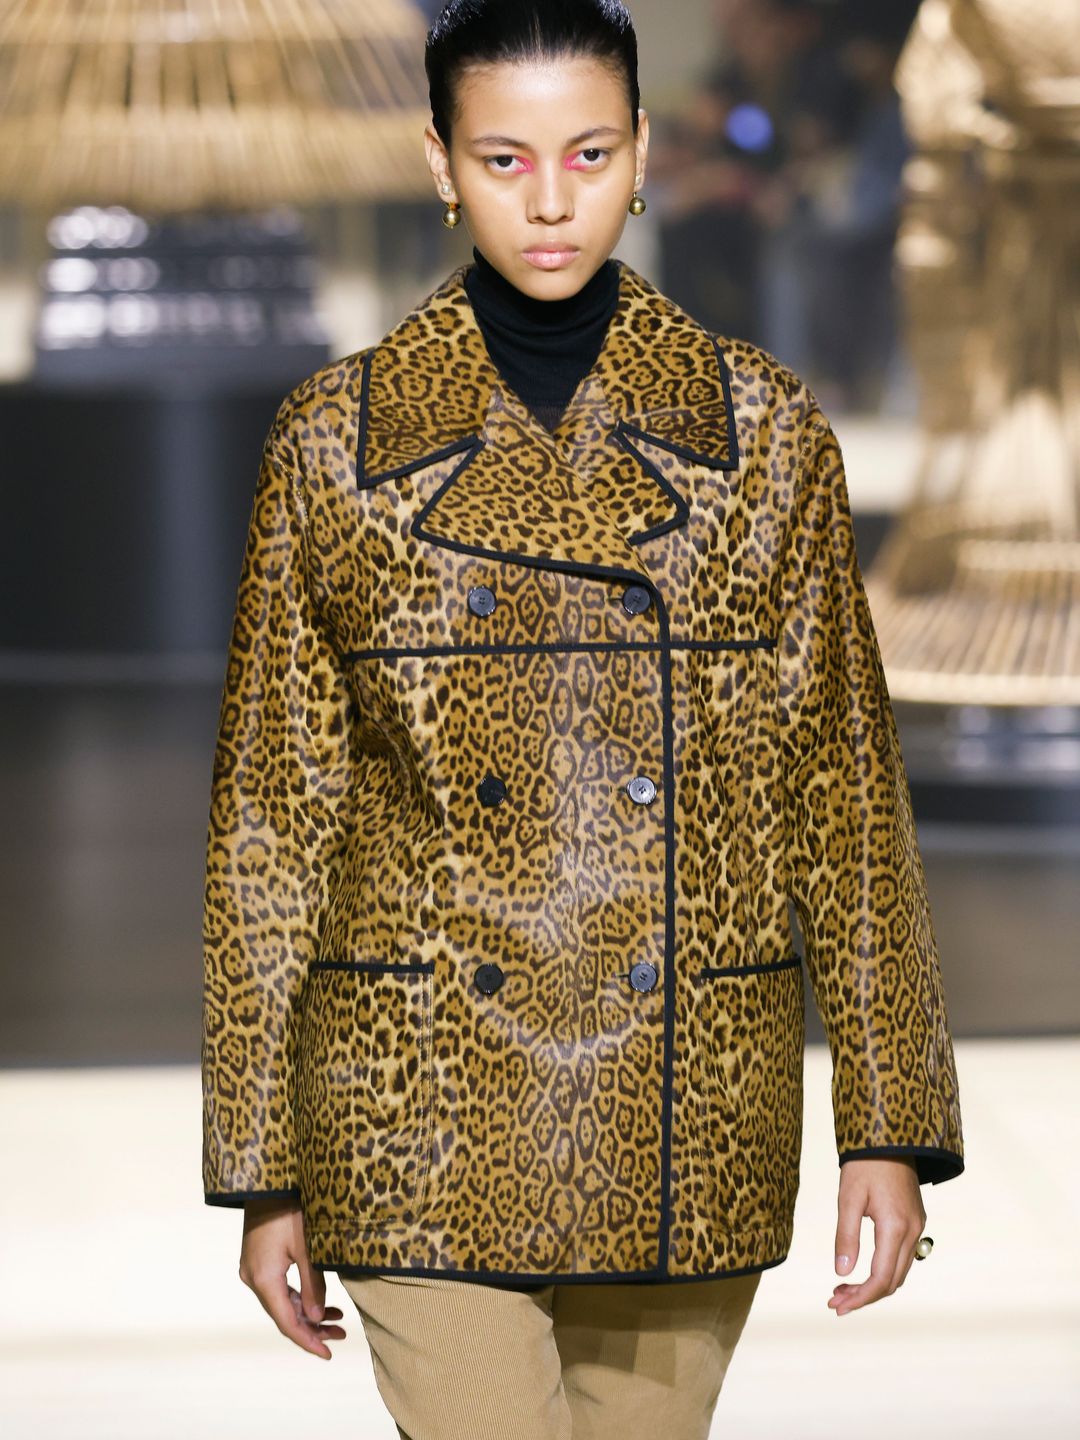 A model walks the runway during the Dior Ready to Wear Fall/Winter 2024-2025 fashion show in a leopard print coat